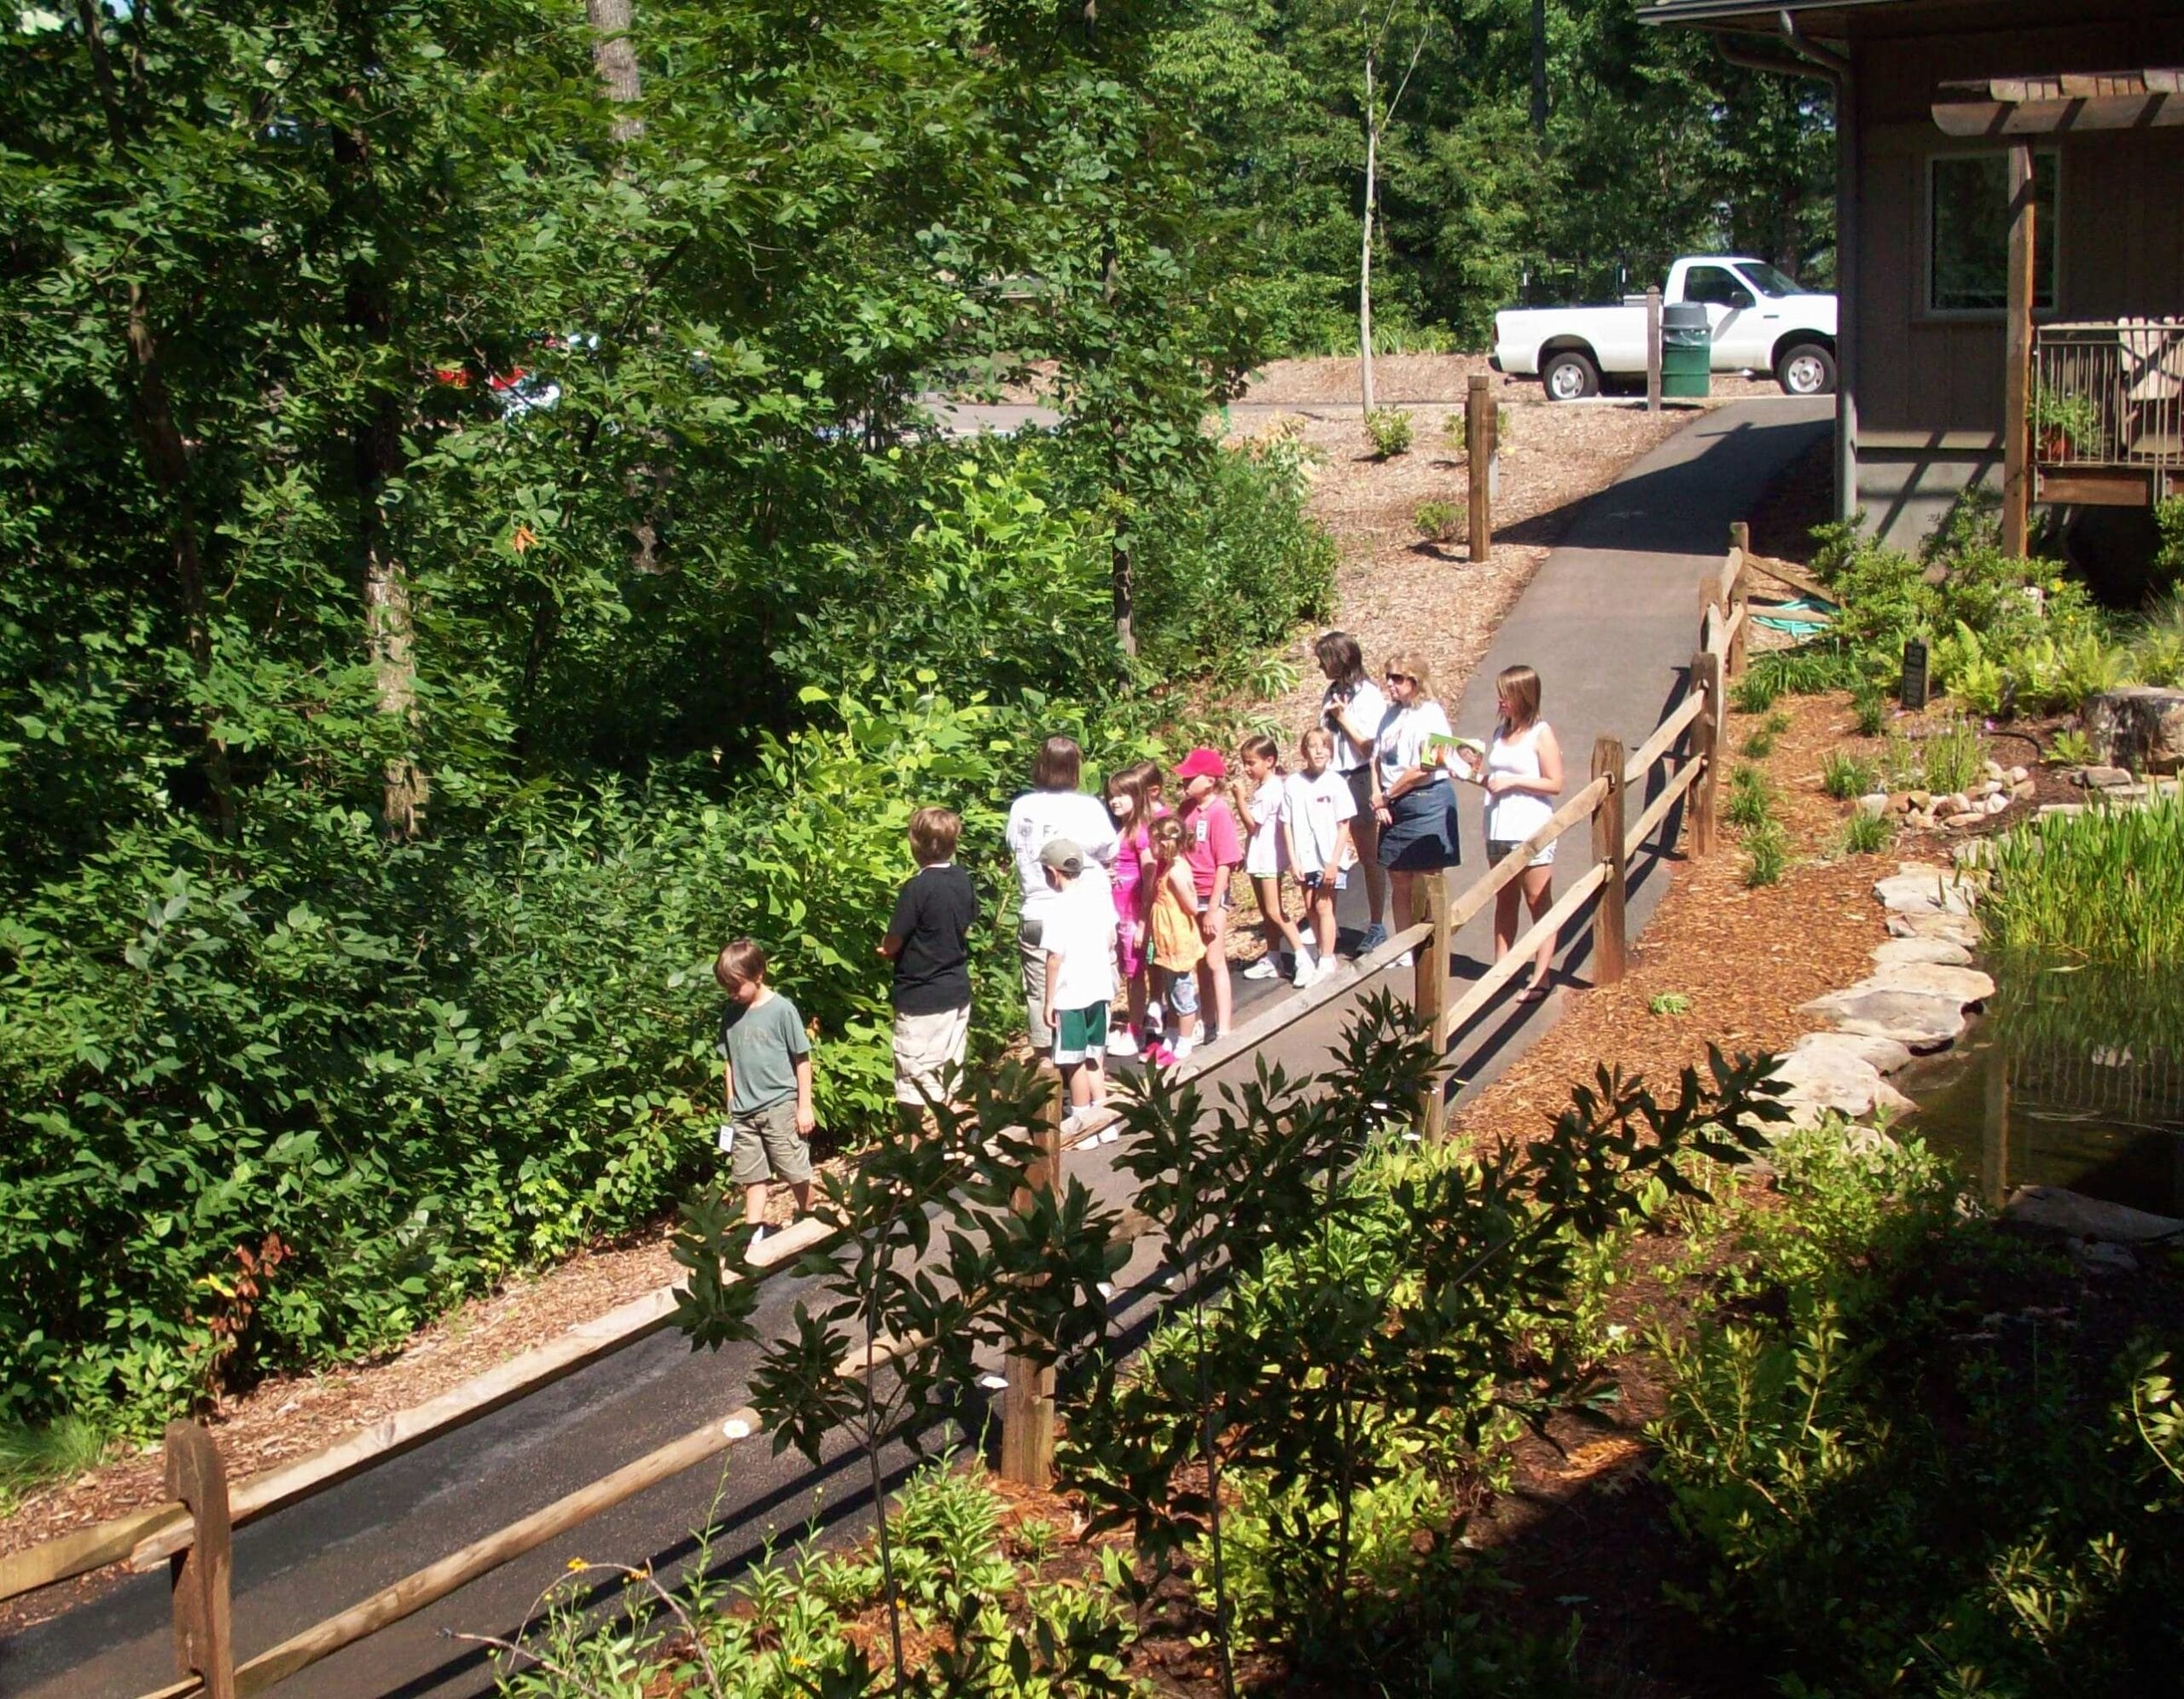 A group of people walking down a path.